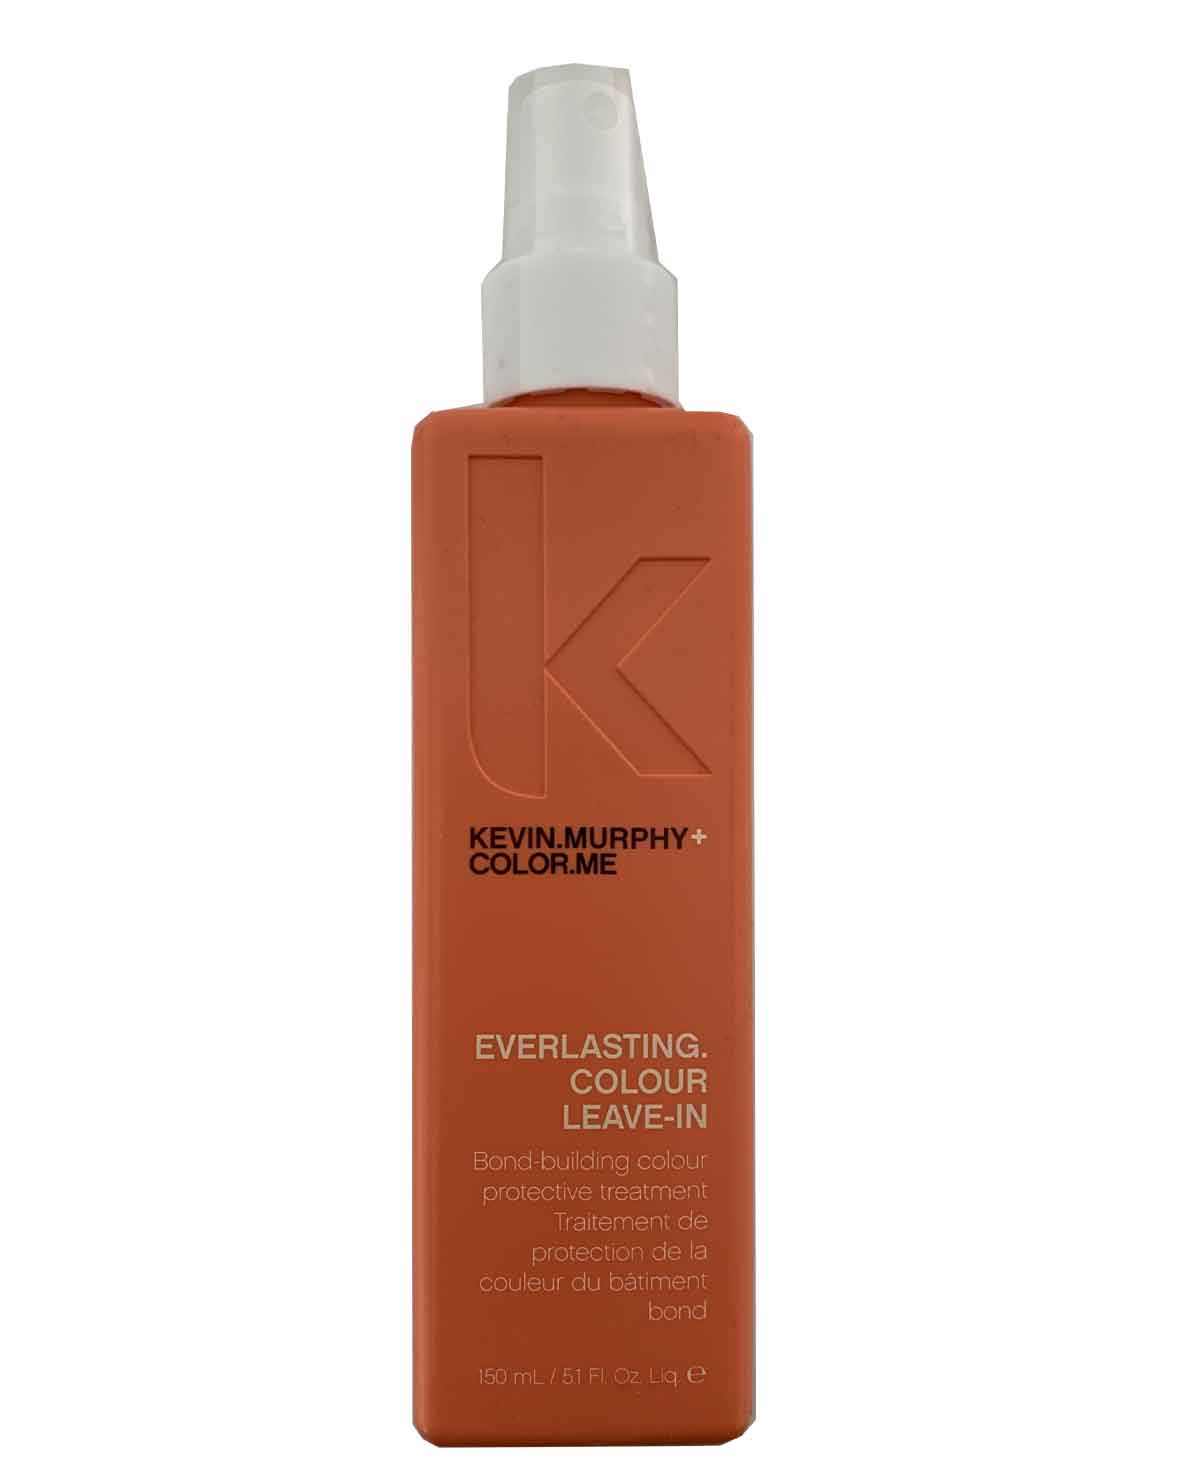 Kevin.Murphy EVERLASTING.COLOUR LEAVE-IN TREATMENT 1000ml